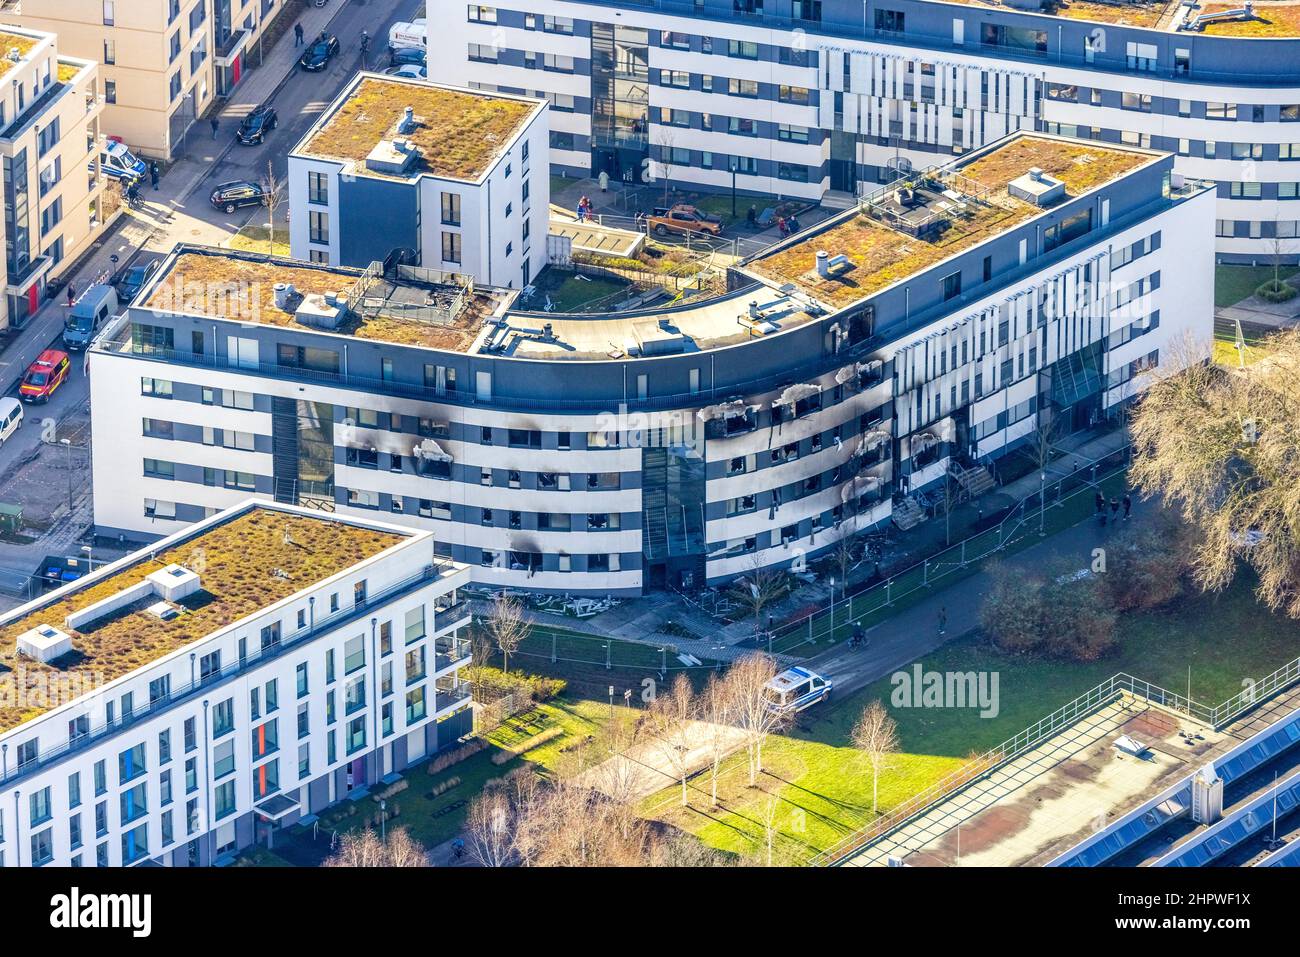 Fire house, aerial view of the burnt out house in Bargmannstraße on Wednesday 23 February 2022 in Essen. A complete residential complex burnt out in t Stock Photo